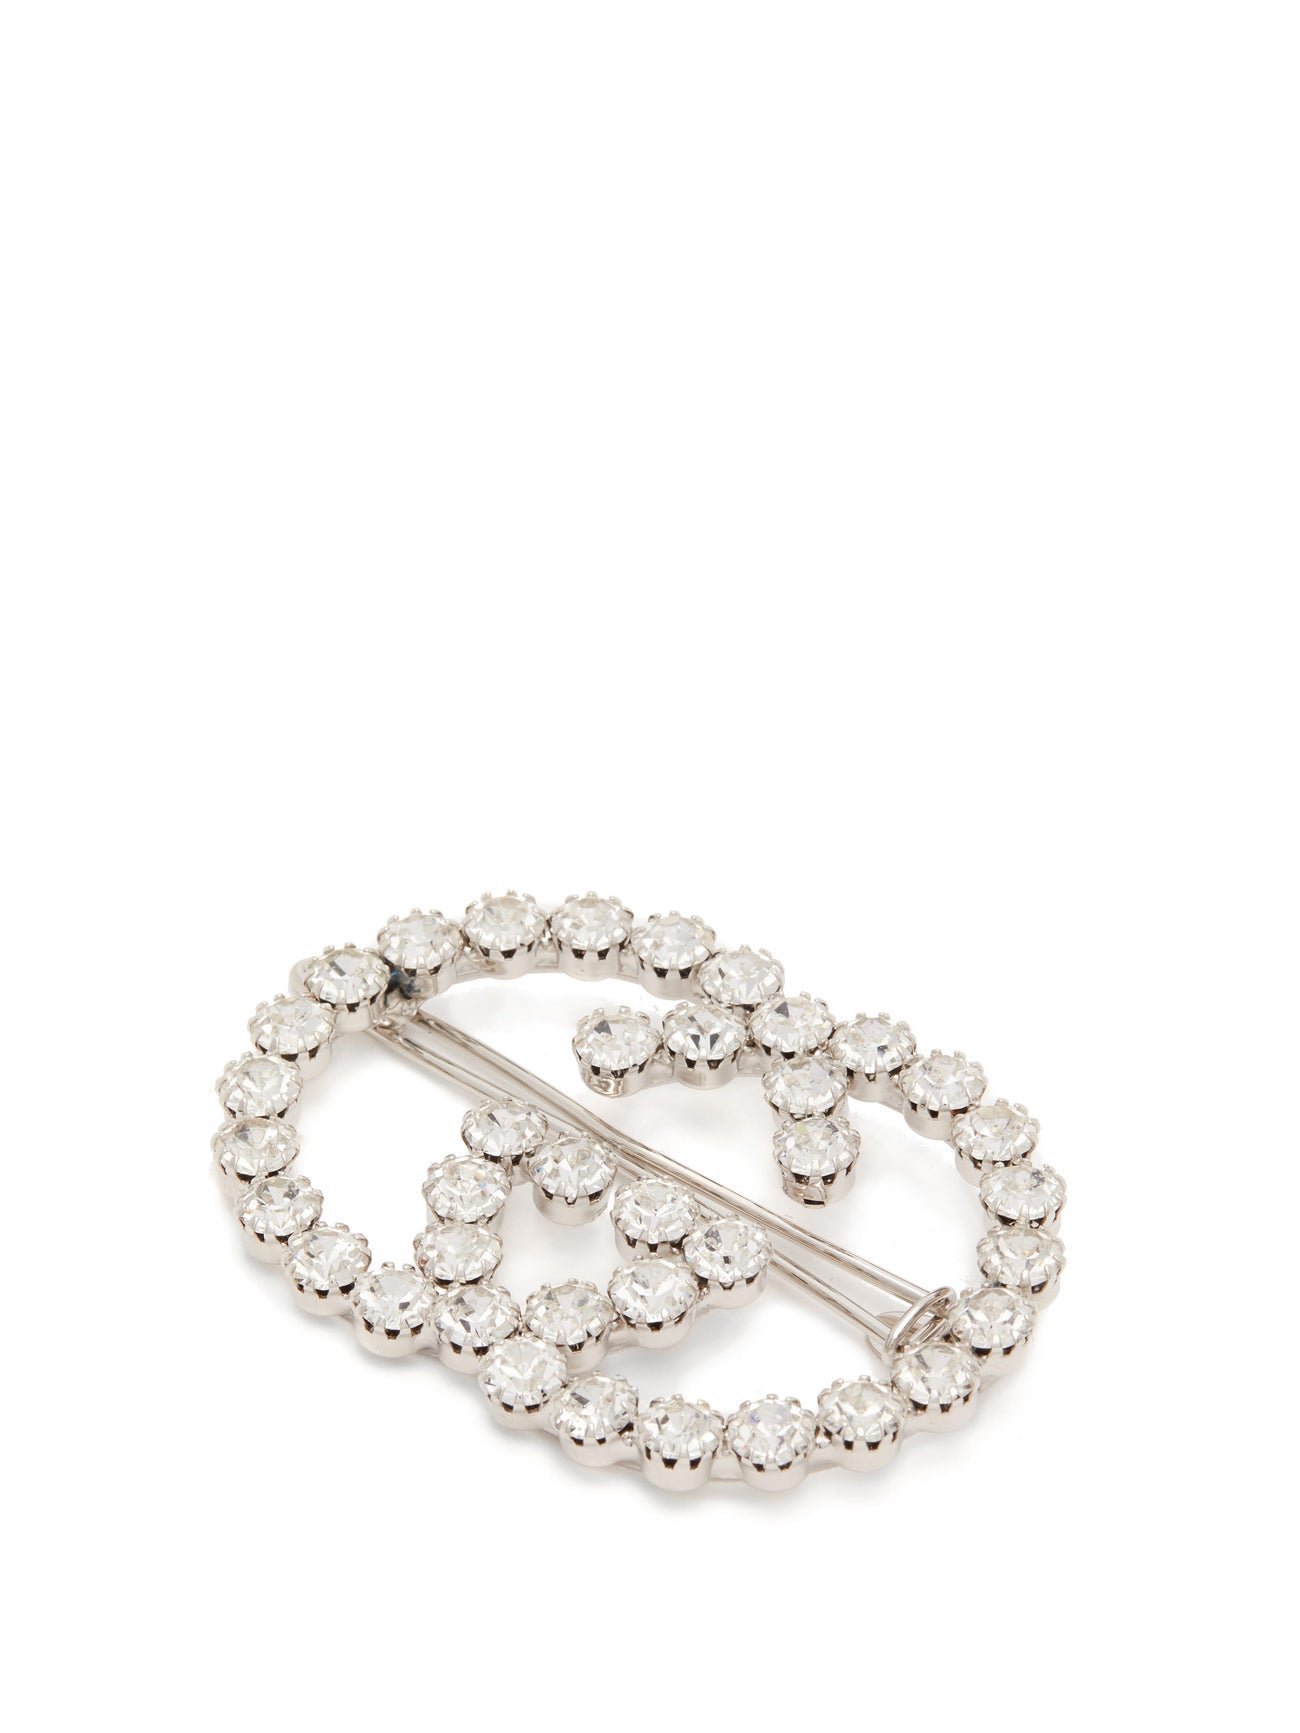 GG Embellished Hair Clip in Metallic - Gucci